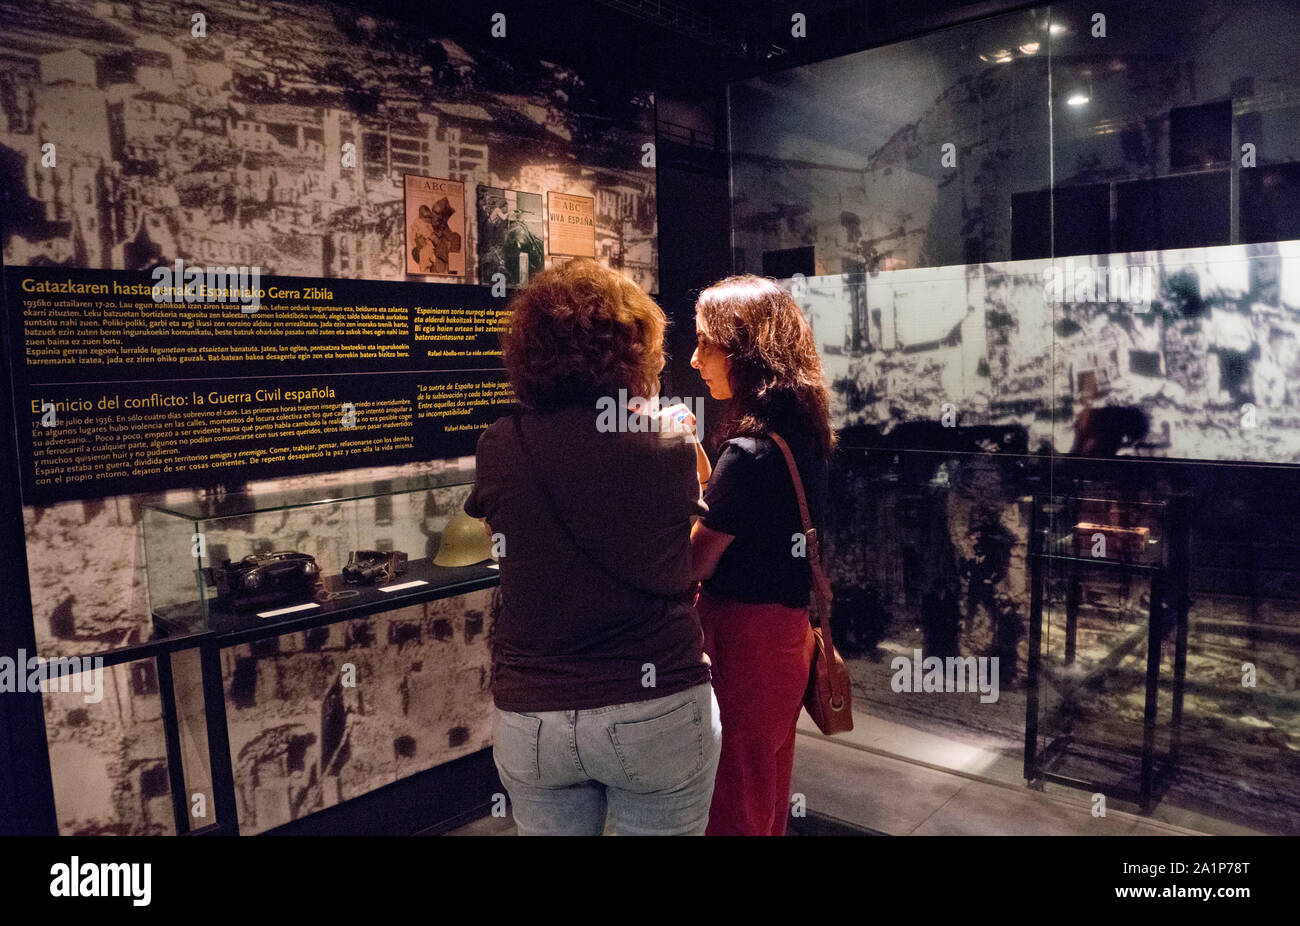 People visit the exhibition of the bombing of Guernica (Gernika) during the Spanish Civil War, at the Museum of Peace,Guernica (Gernika),Basque Countr Stock Photo